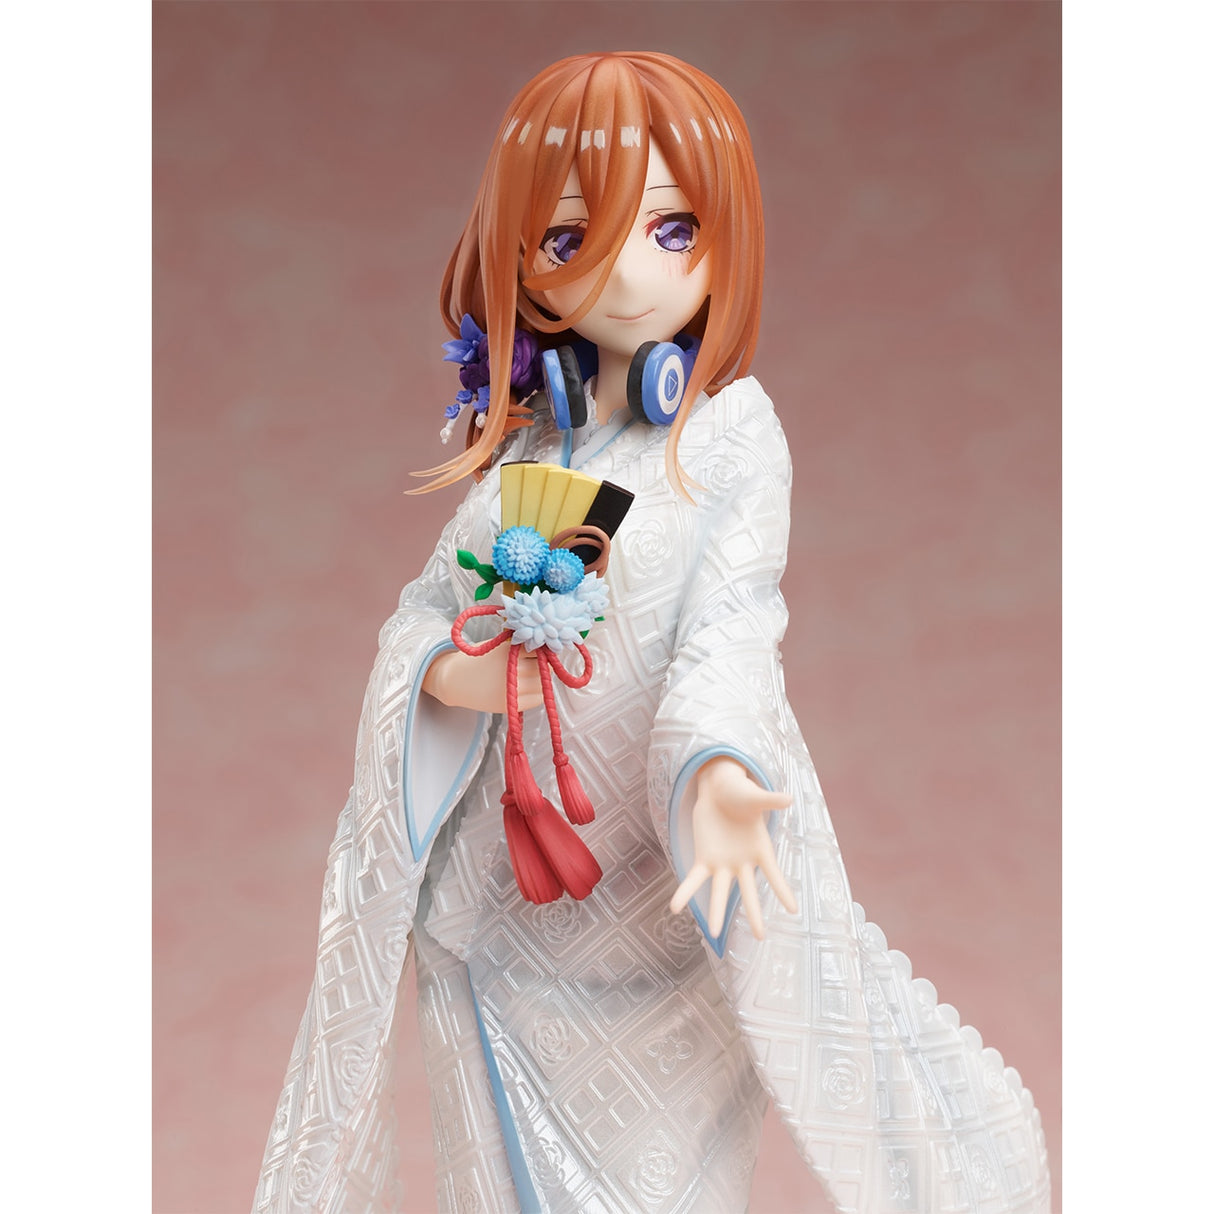 This figurine showcase the purity and charm of Miku in stunning detail. | If you are looking for more The Quintessential Merch, We have it all! | Check out all our Anime Merch now!